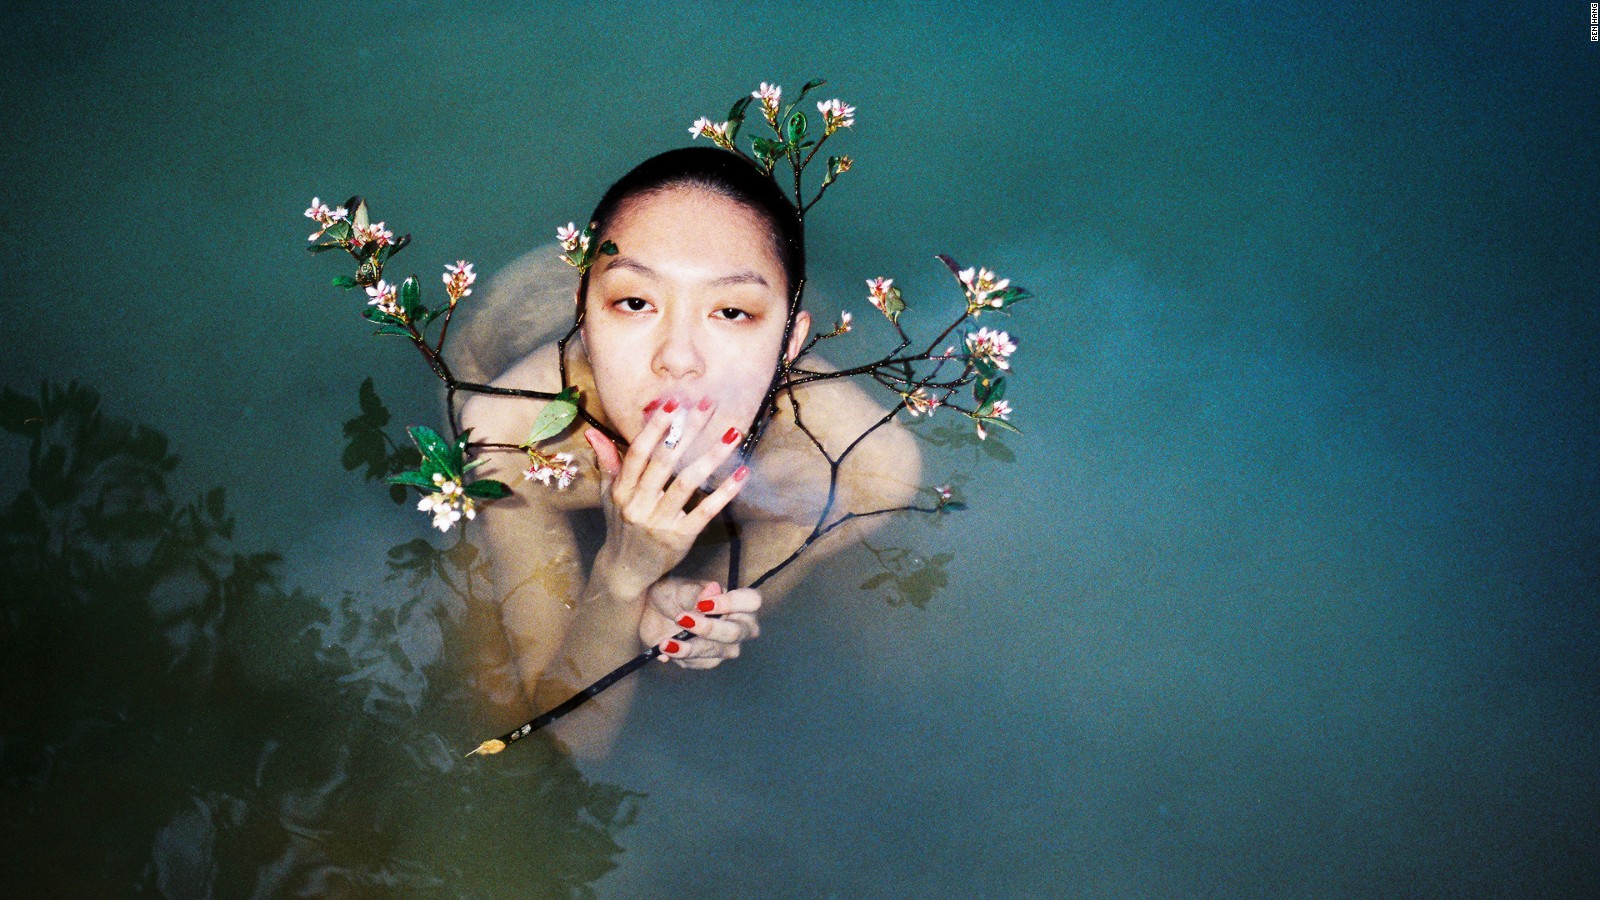 Verblinding Aanbeveling mobiel Why Ren Hang's photographs stir controversy - CNN Style